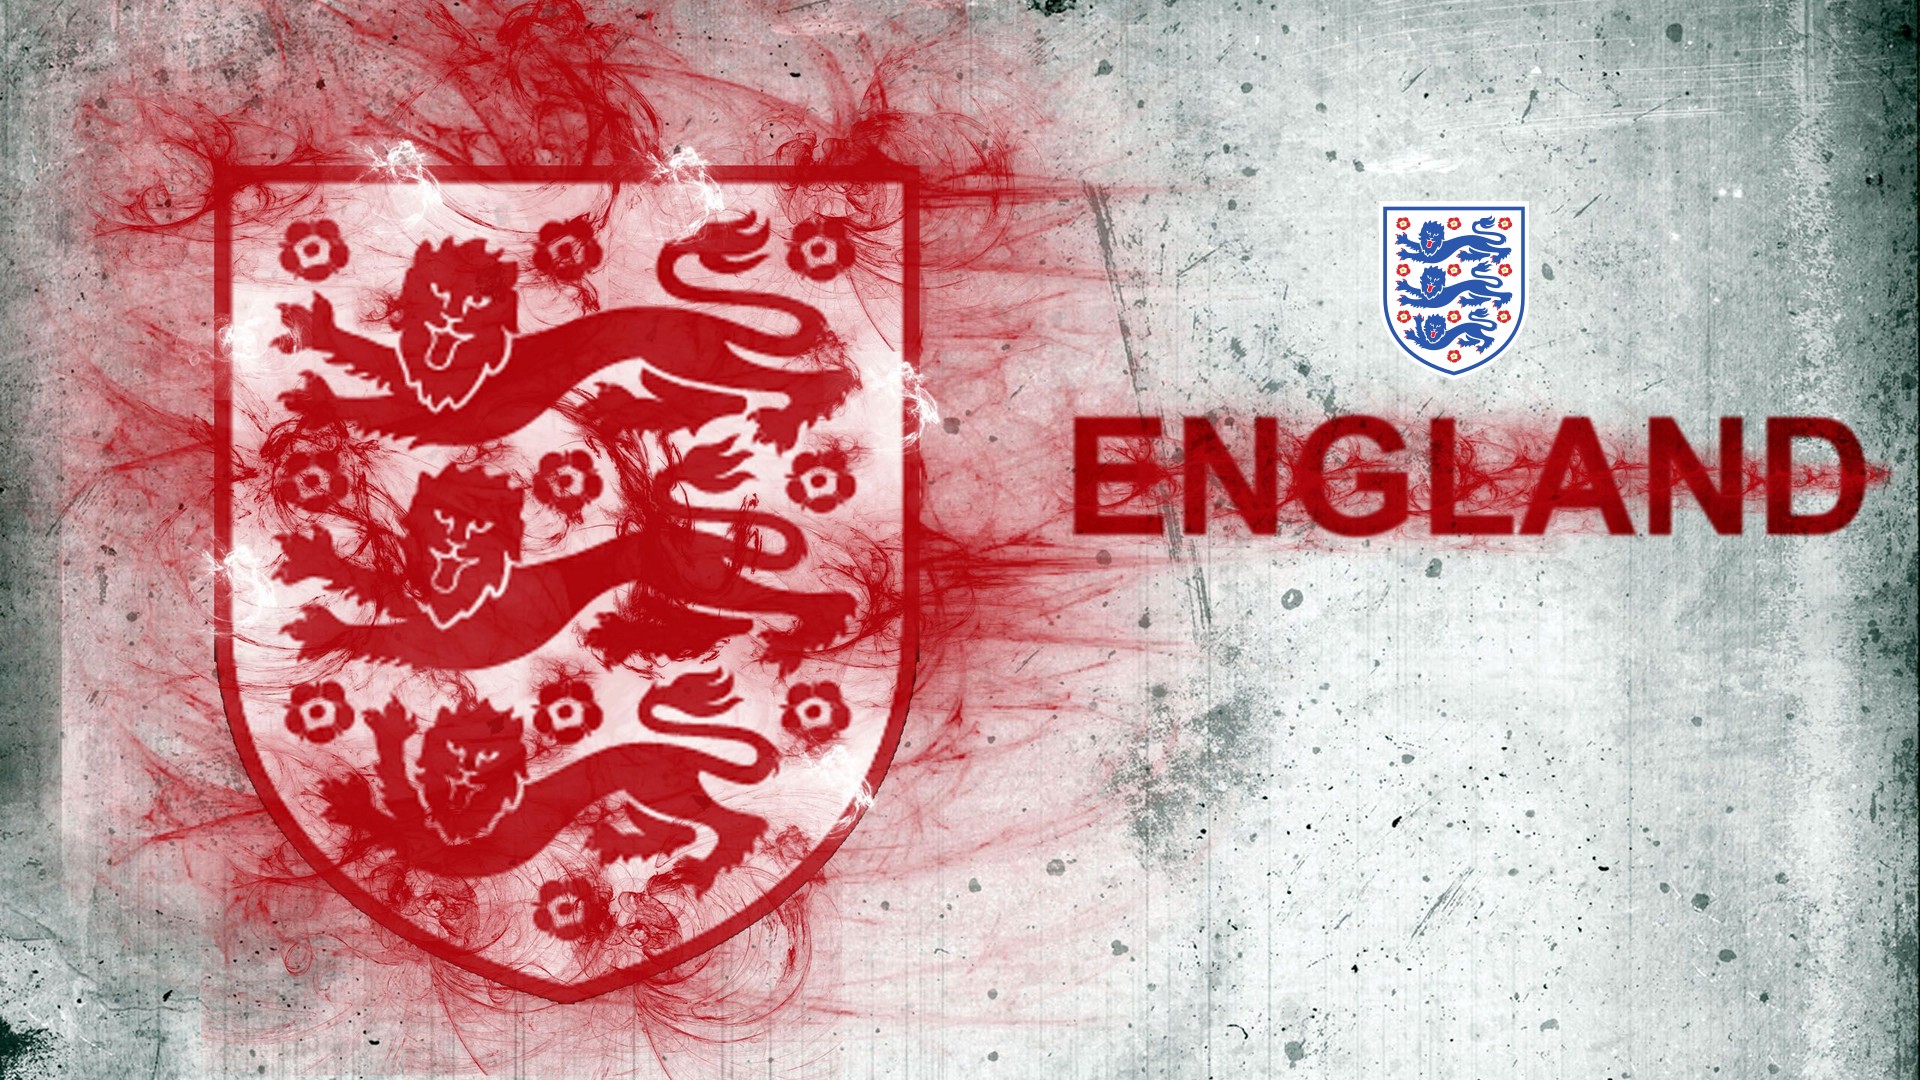 England National Team Wallpaper HD With Resolution 1920X1080 pixel. You can make this wallpaper for your Mac or Windows Desktop Background, iPhone, Android or Tablet and another Smartphone device for free